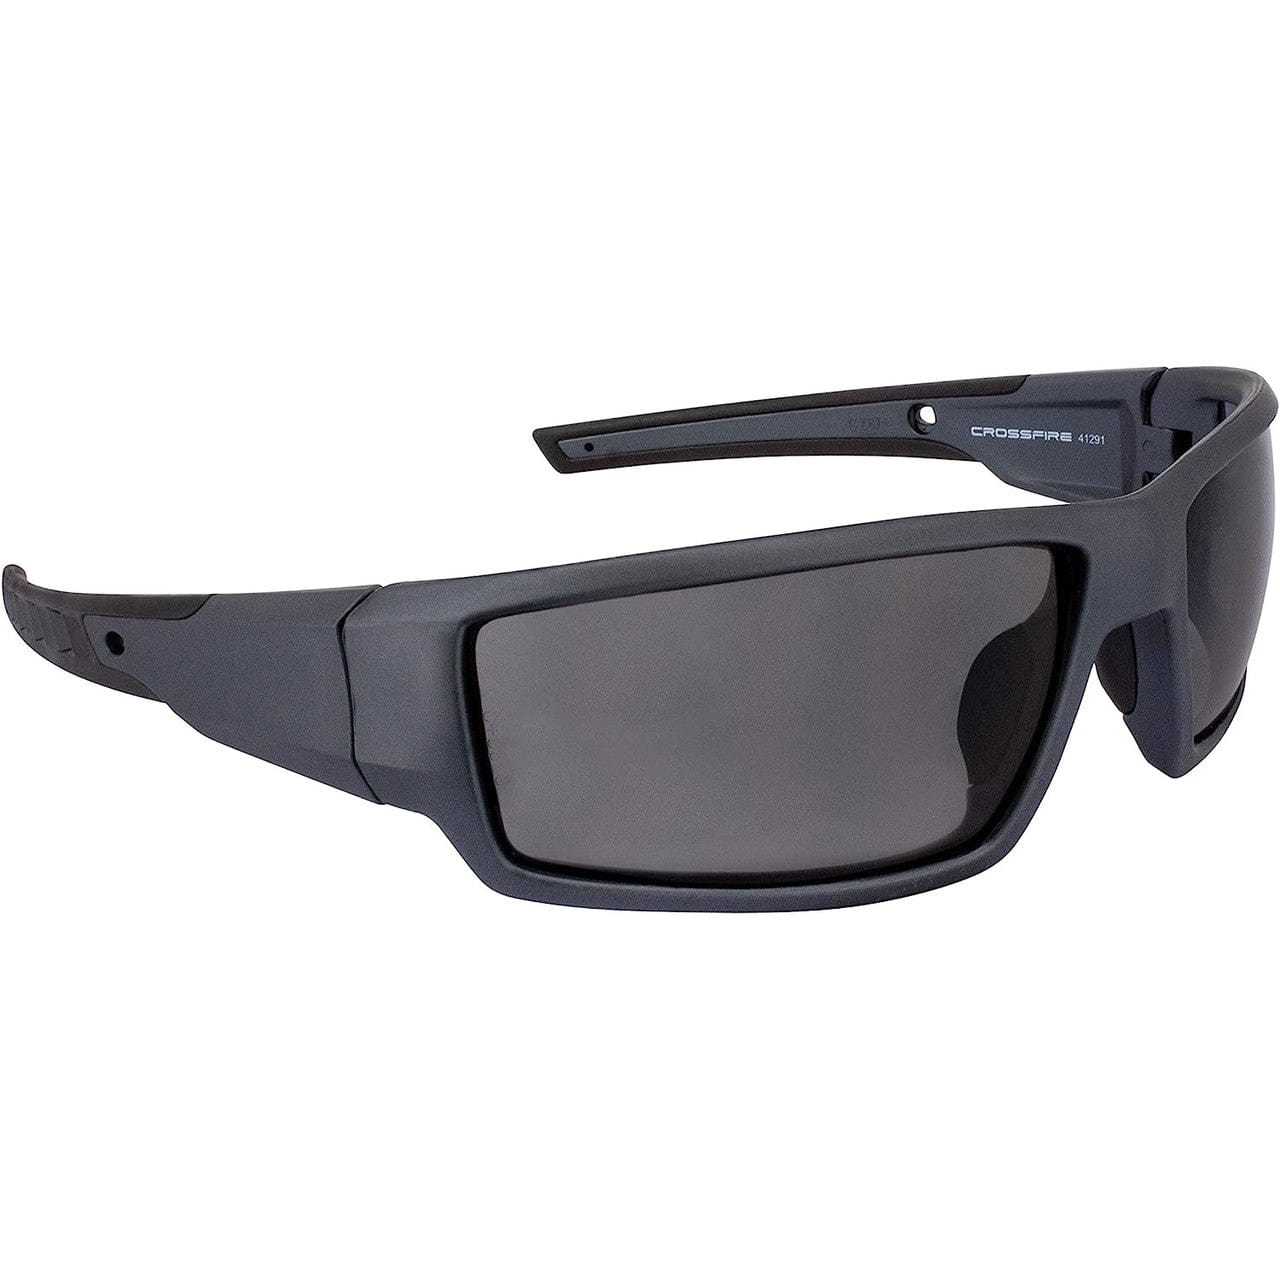 Crossfire 41291 Cumulus Safety Glasses - Gray Frame - Smoke Lens